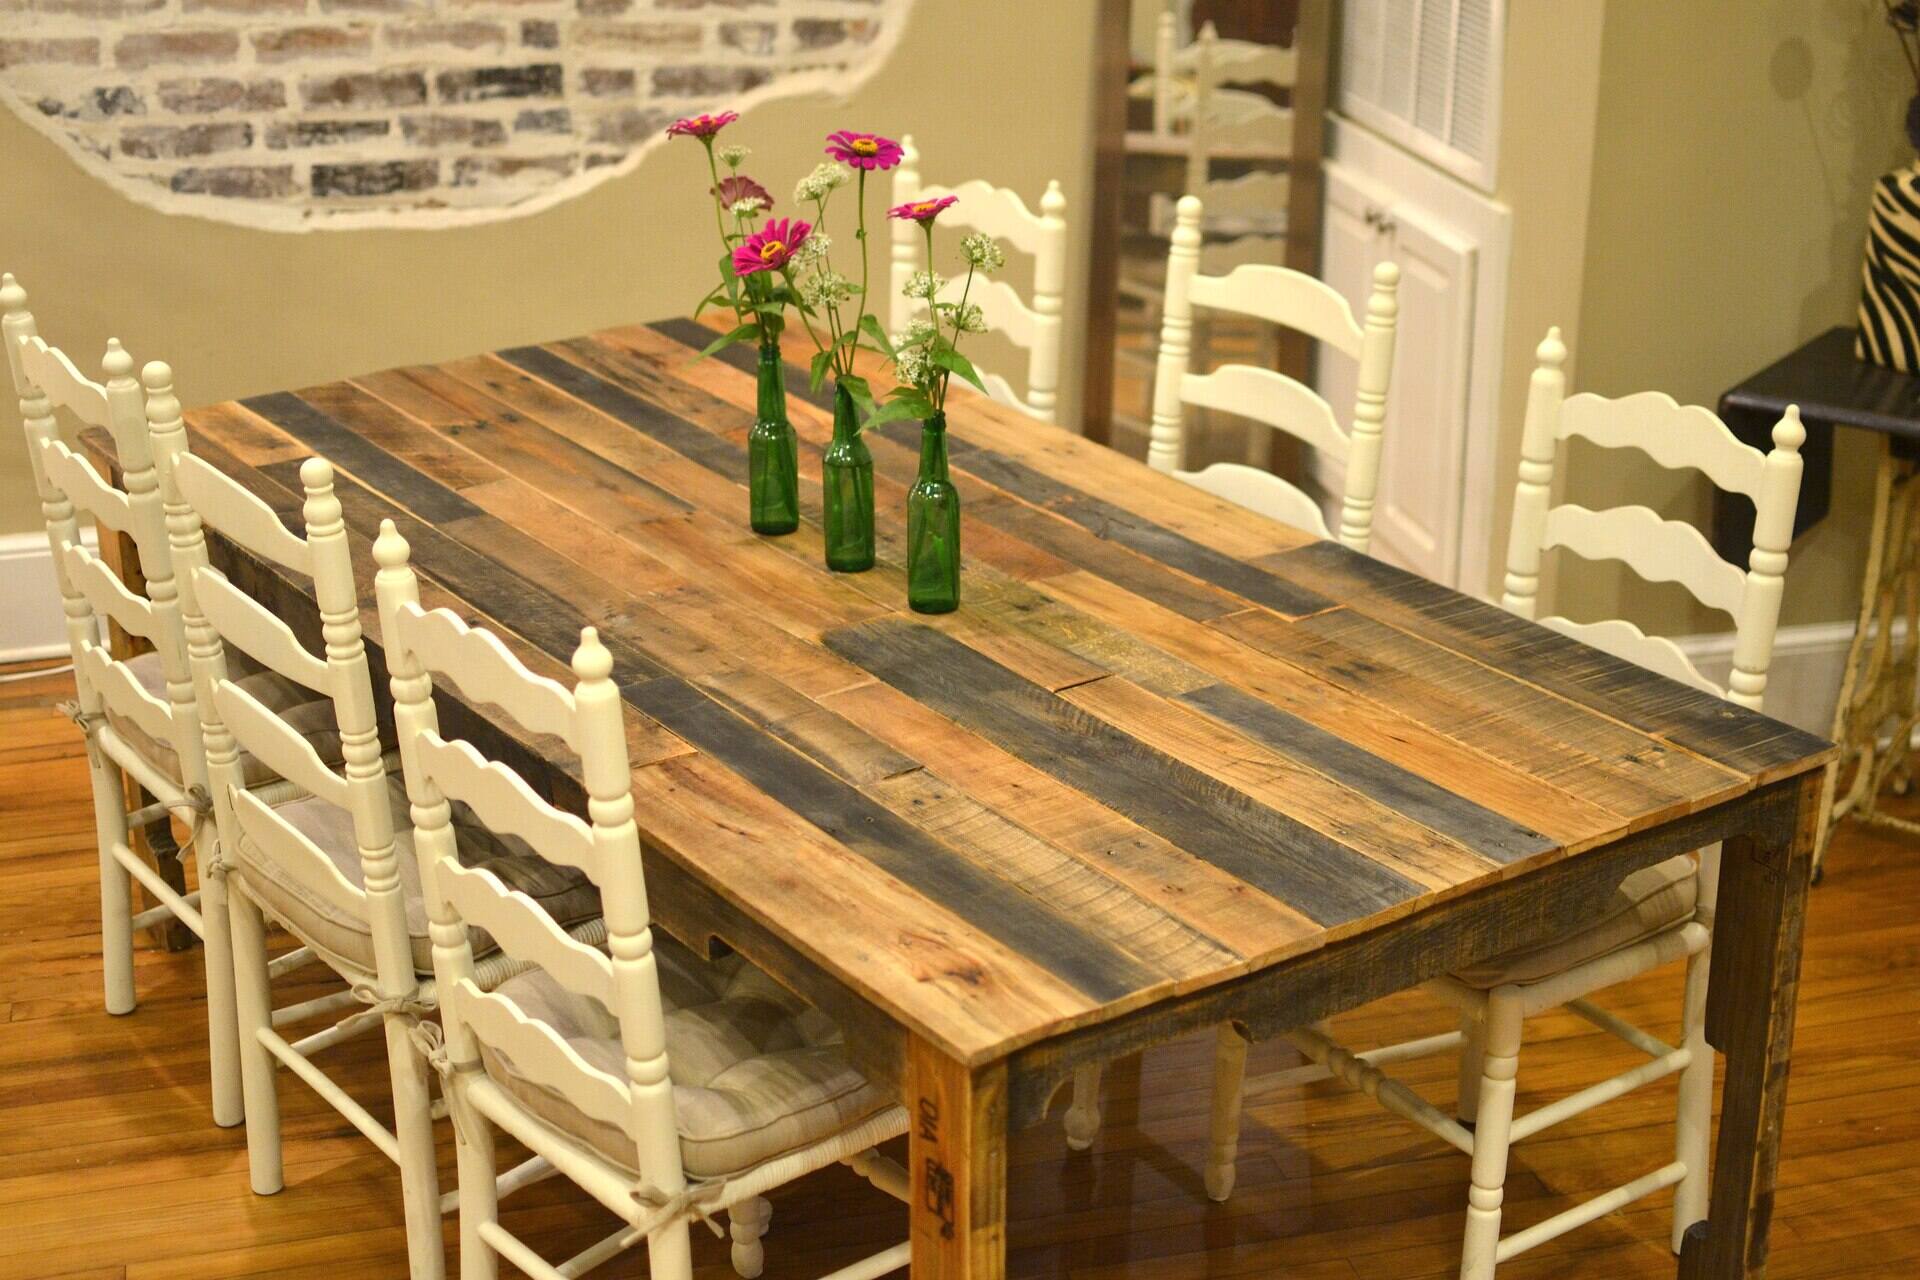 How To Make A Country-Style Table